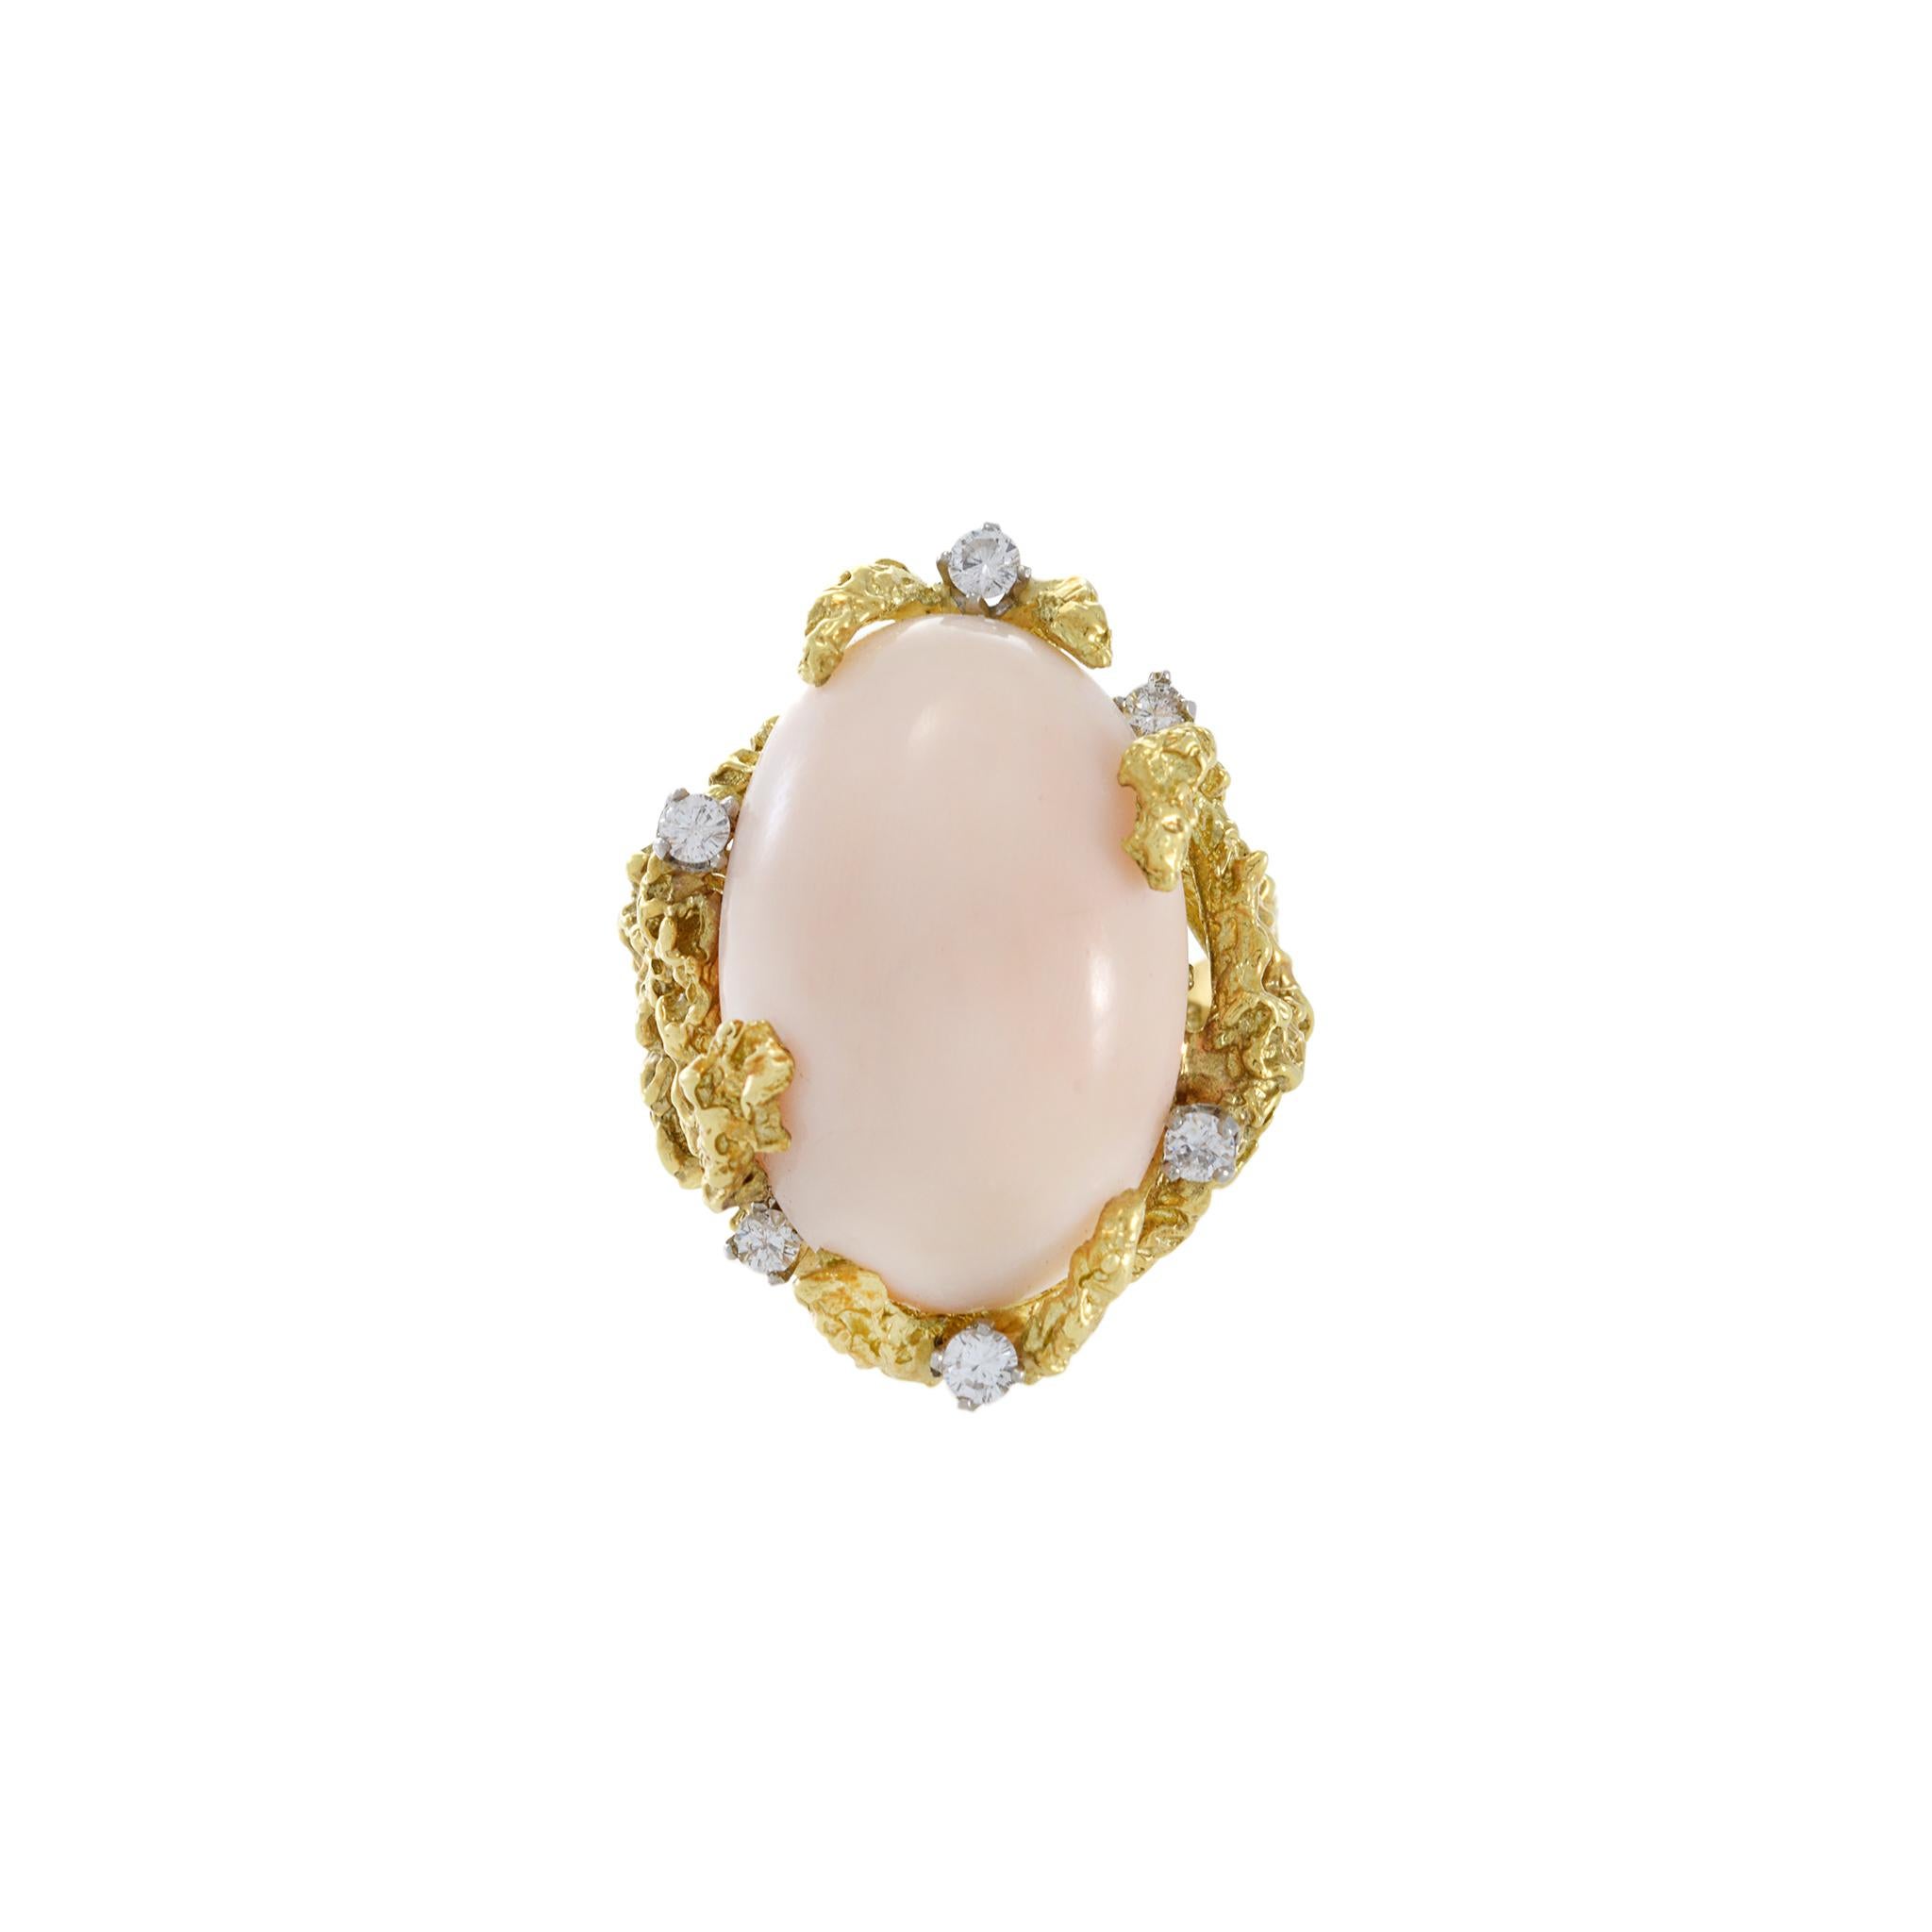 Cabochon Retro Era 18KT Yellow Gold Angel Skin Coral And Diamond Ring For Sale